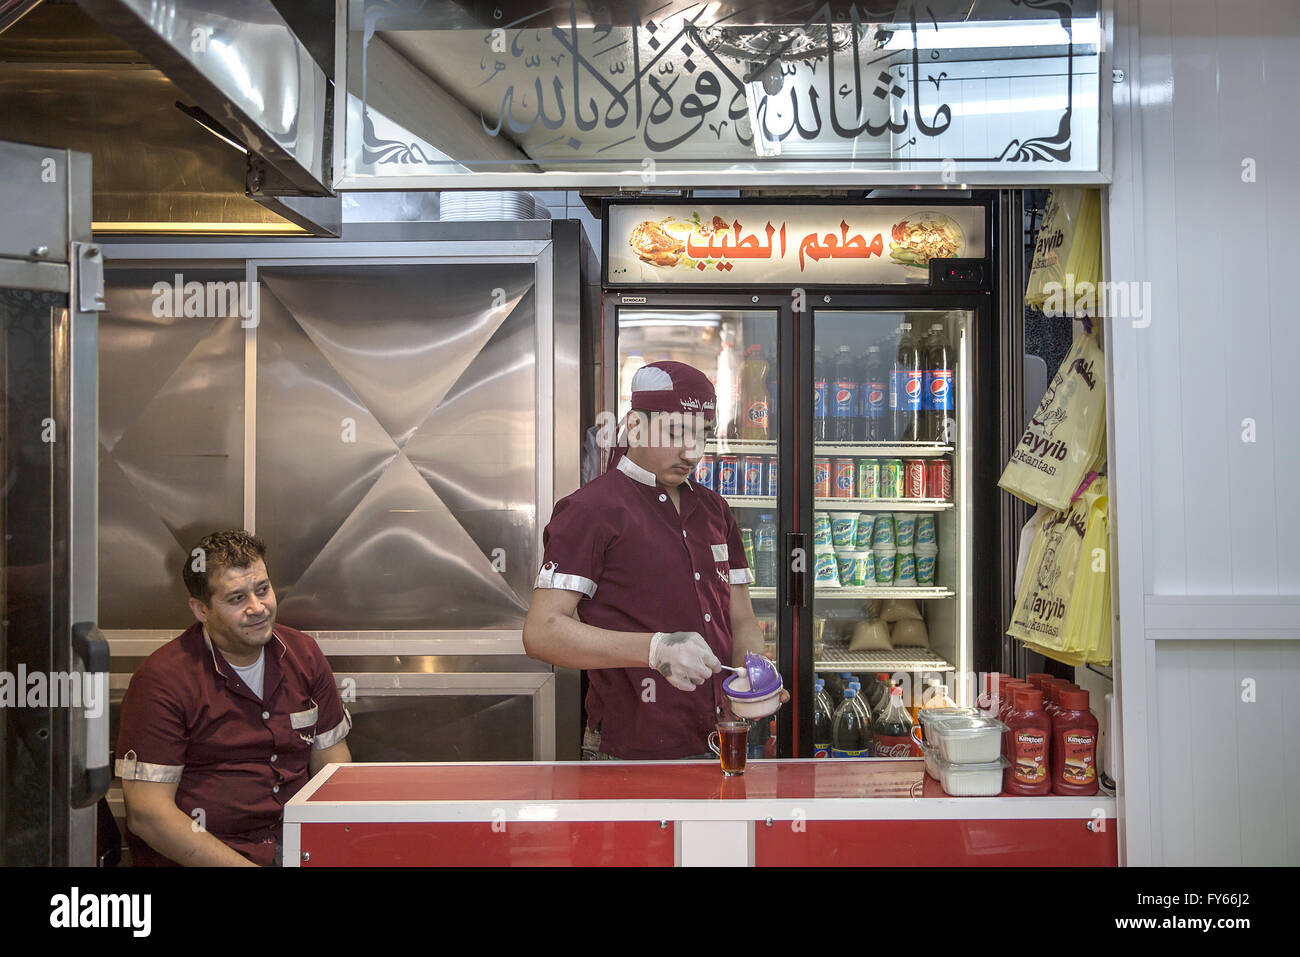 Syrian workers of an arabic restaurant in Kilis, Turkey on 22/4/16. Tens of thousands of syrian refugees are living in Kilis. Photo: Uygar Onder Simsek/dpa Stock Photo